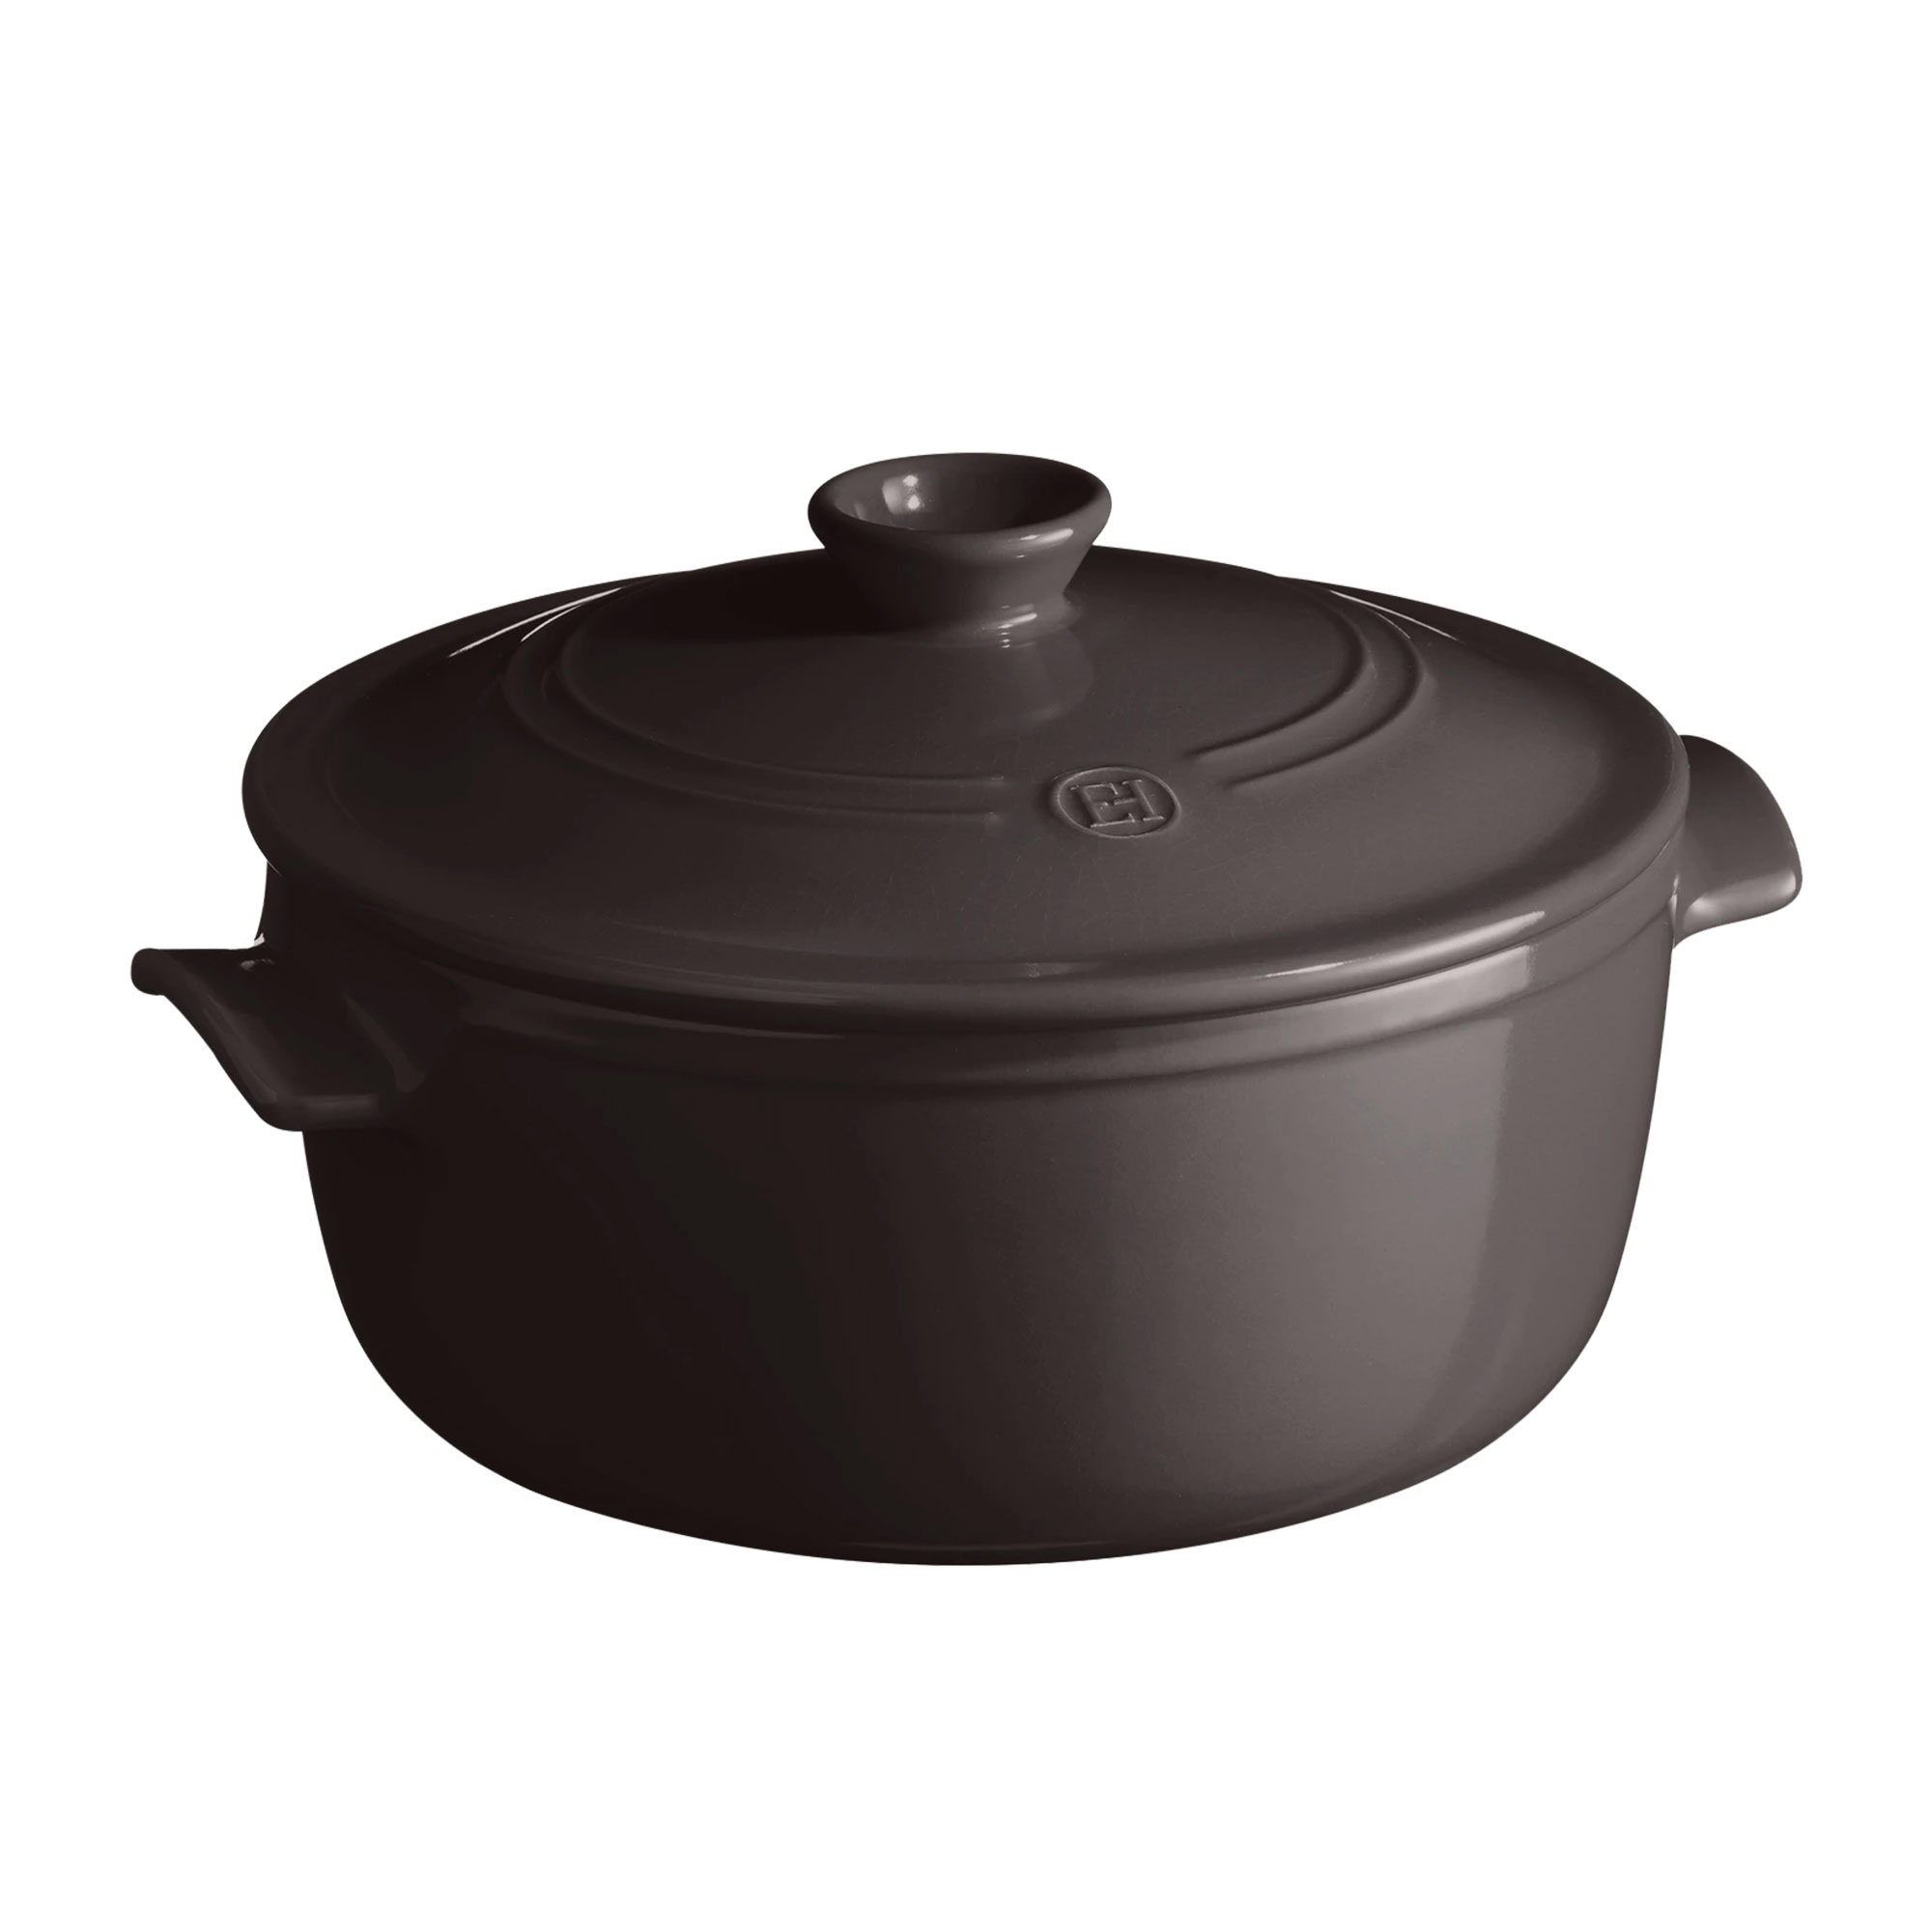 Emile Henry Round Stewpot 5L Charcoal Image 1